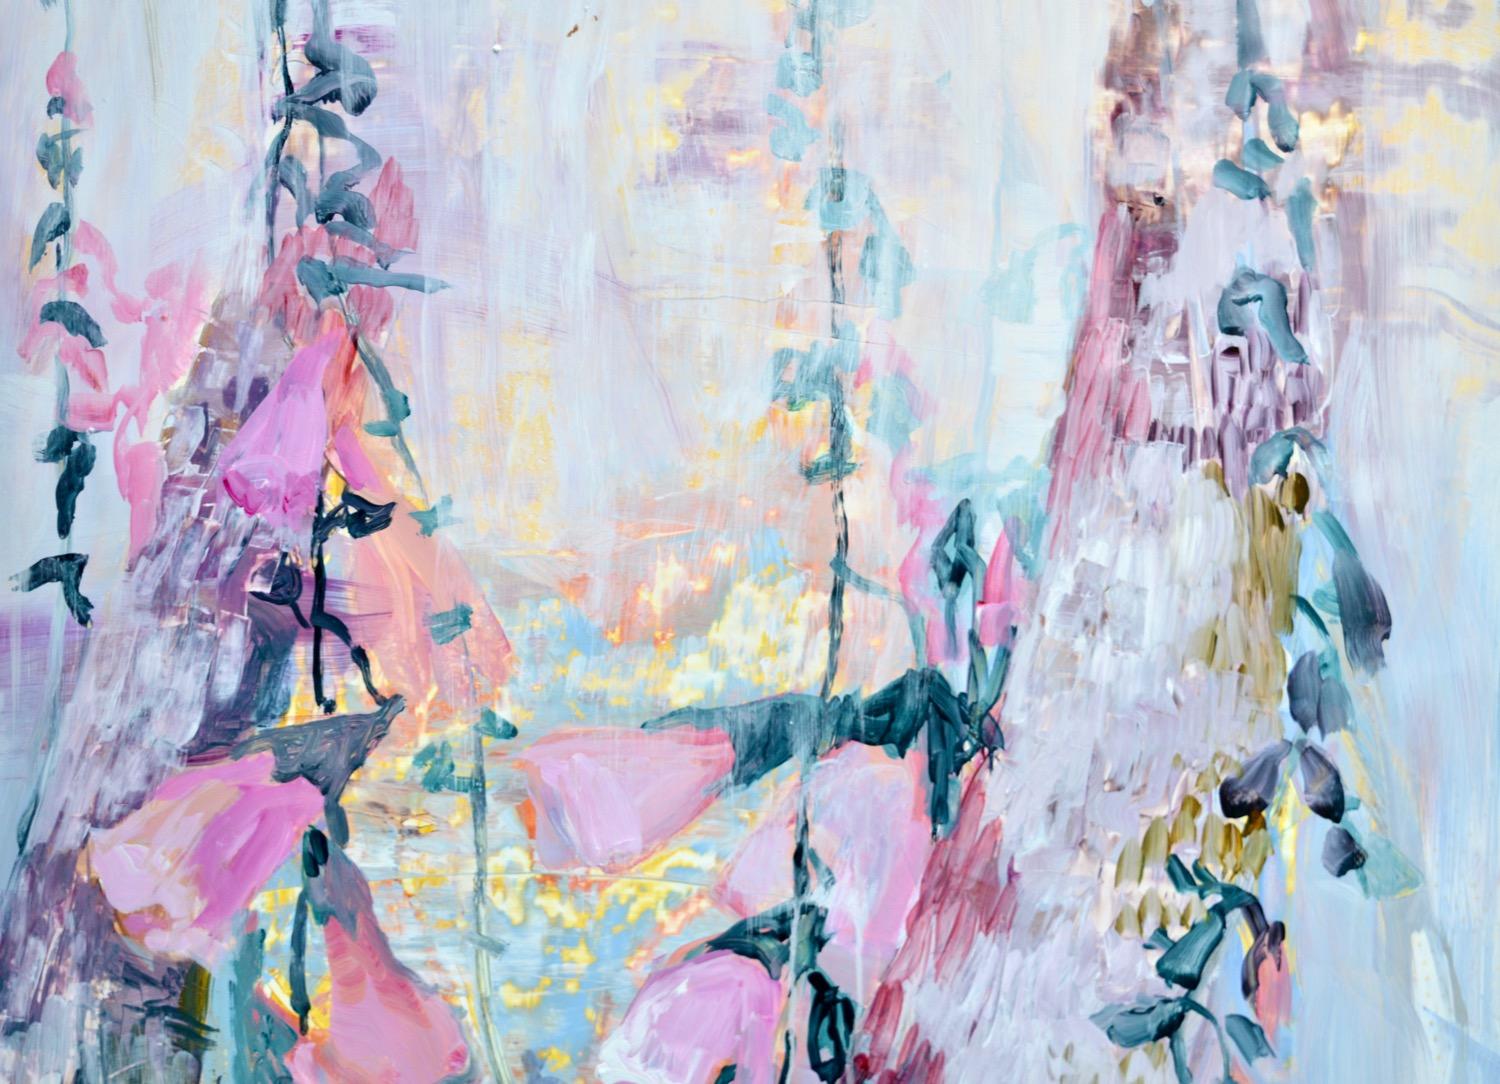 <p>Artist Comments<br>This painting is part of Julia Hacker's latest series focused on capturing the essence of florals through abstract expression. Julia uses wide brushes to express the freedom of nature, consciously avoiding details. 